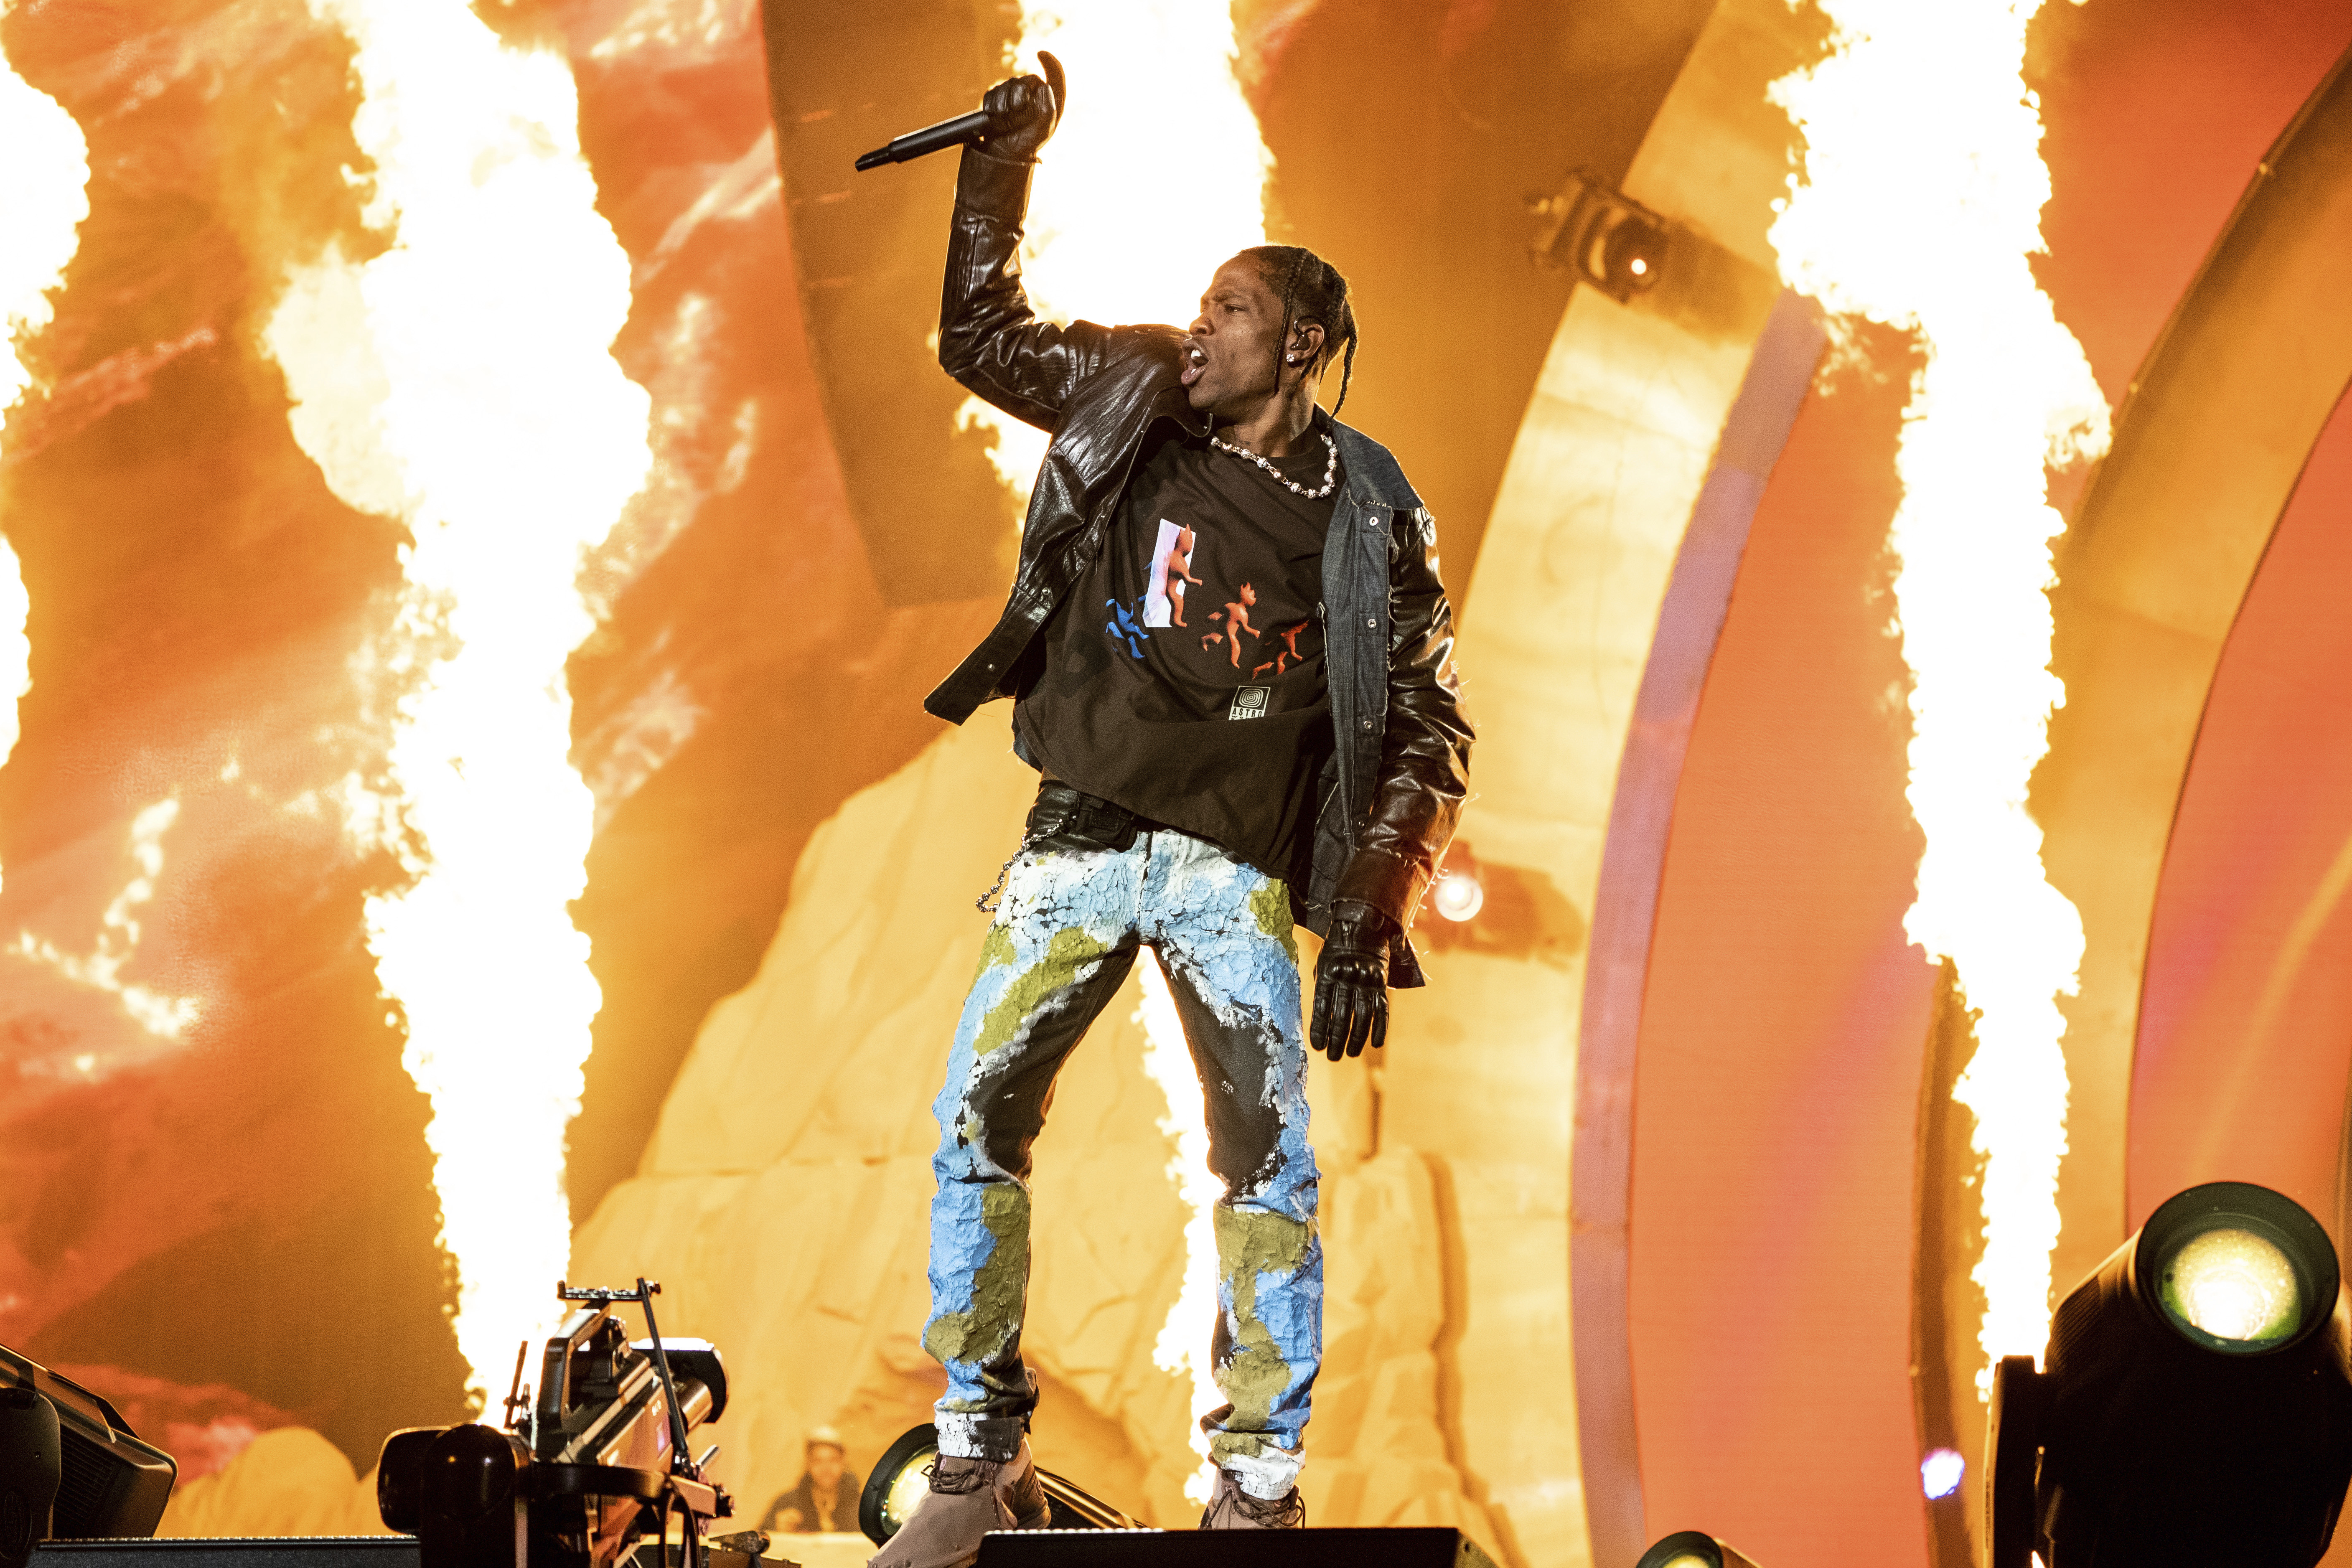 Travis Scott brought Ye on stage at his Orlando performance